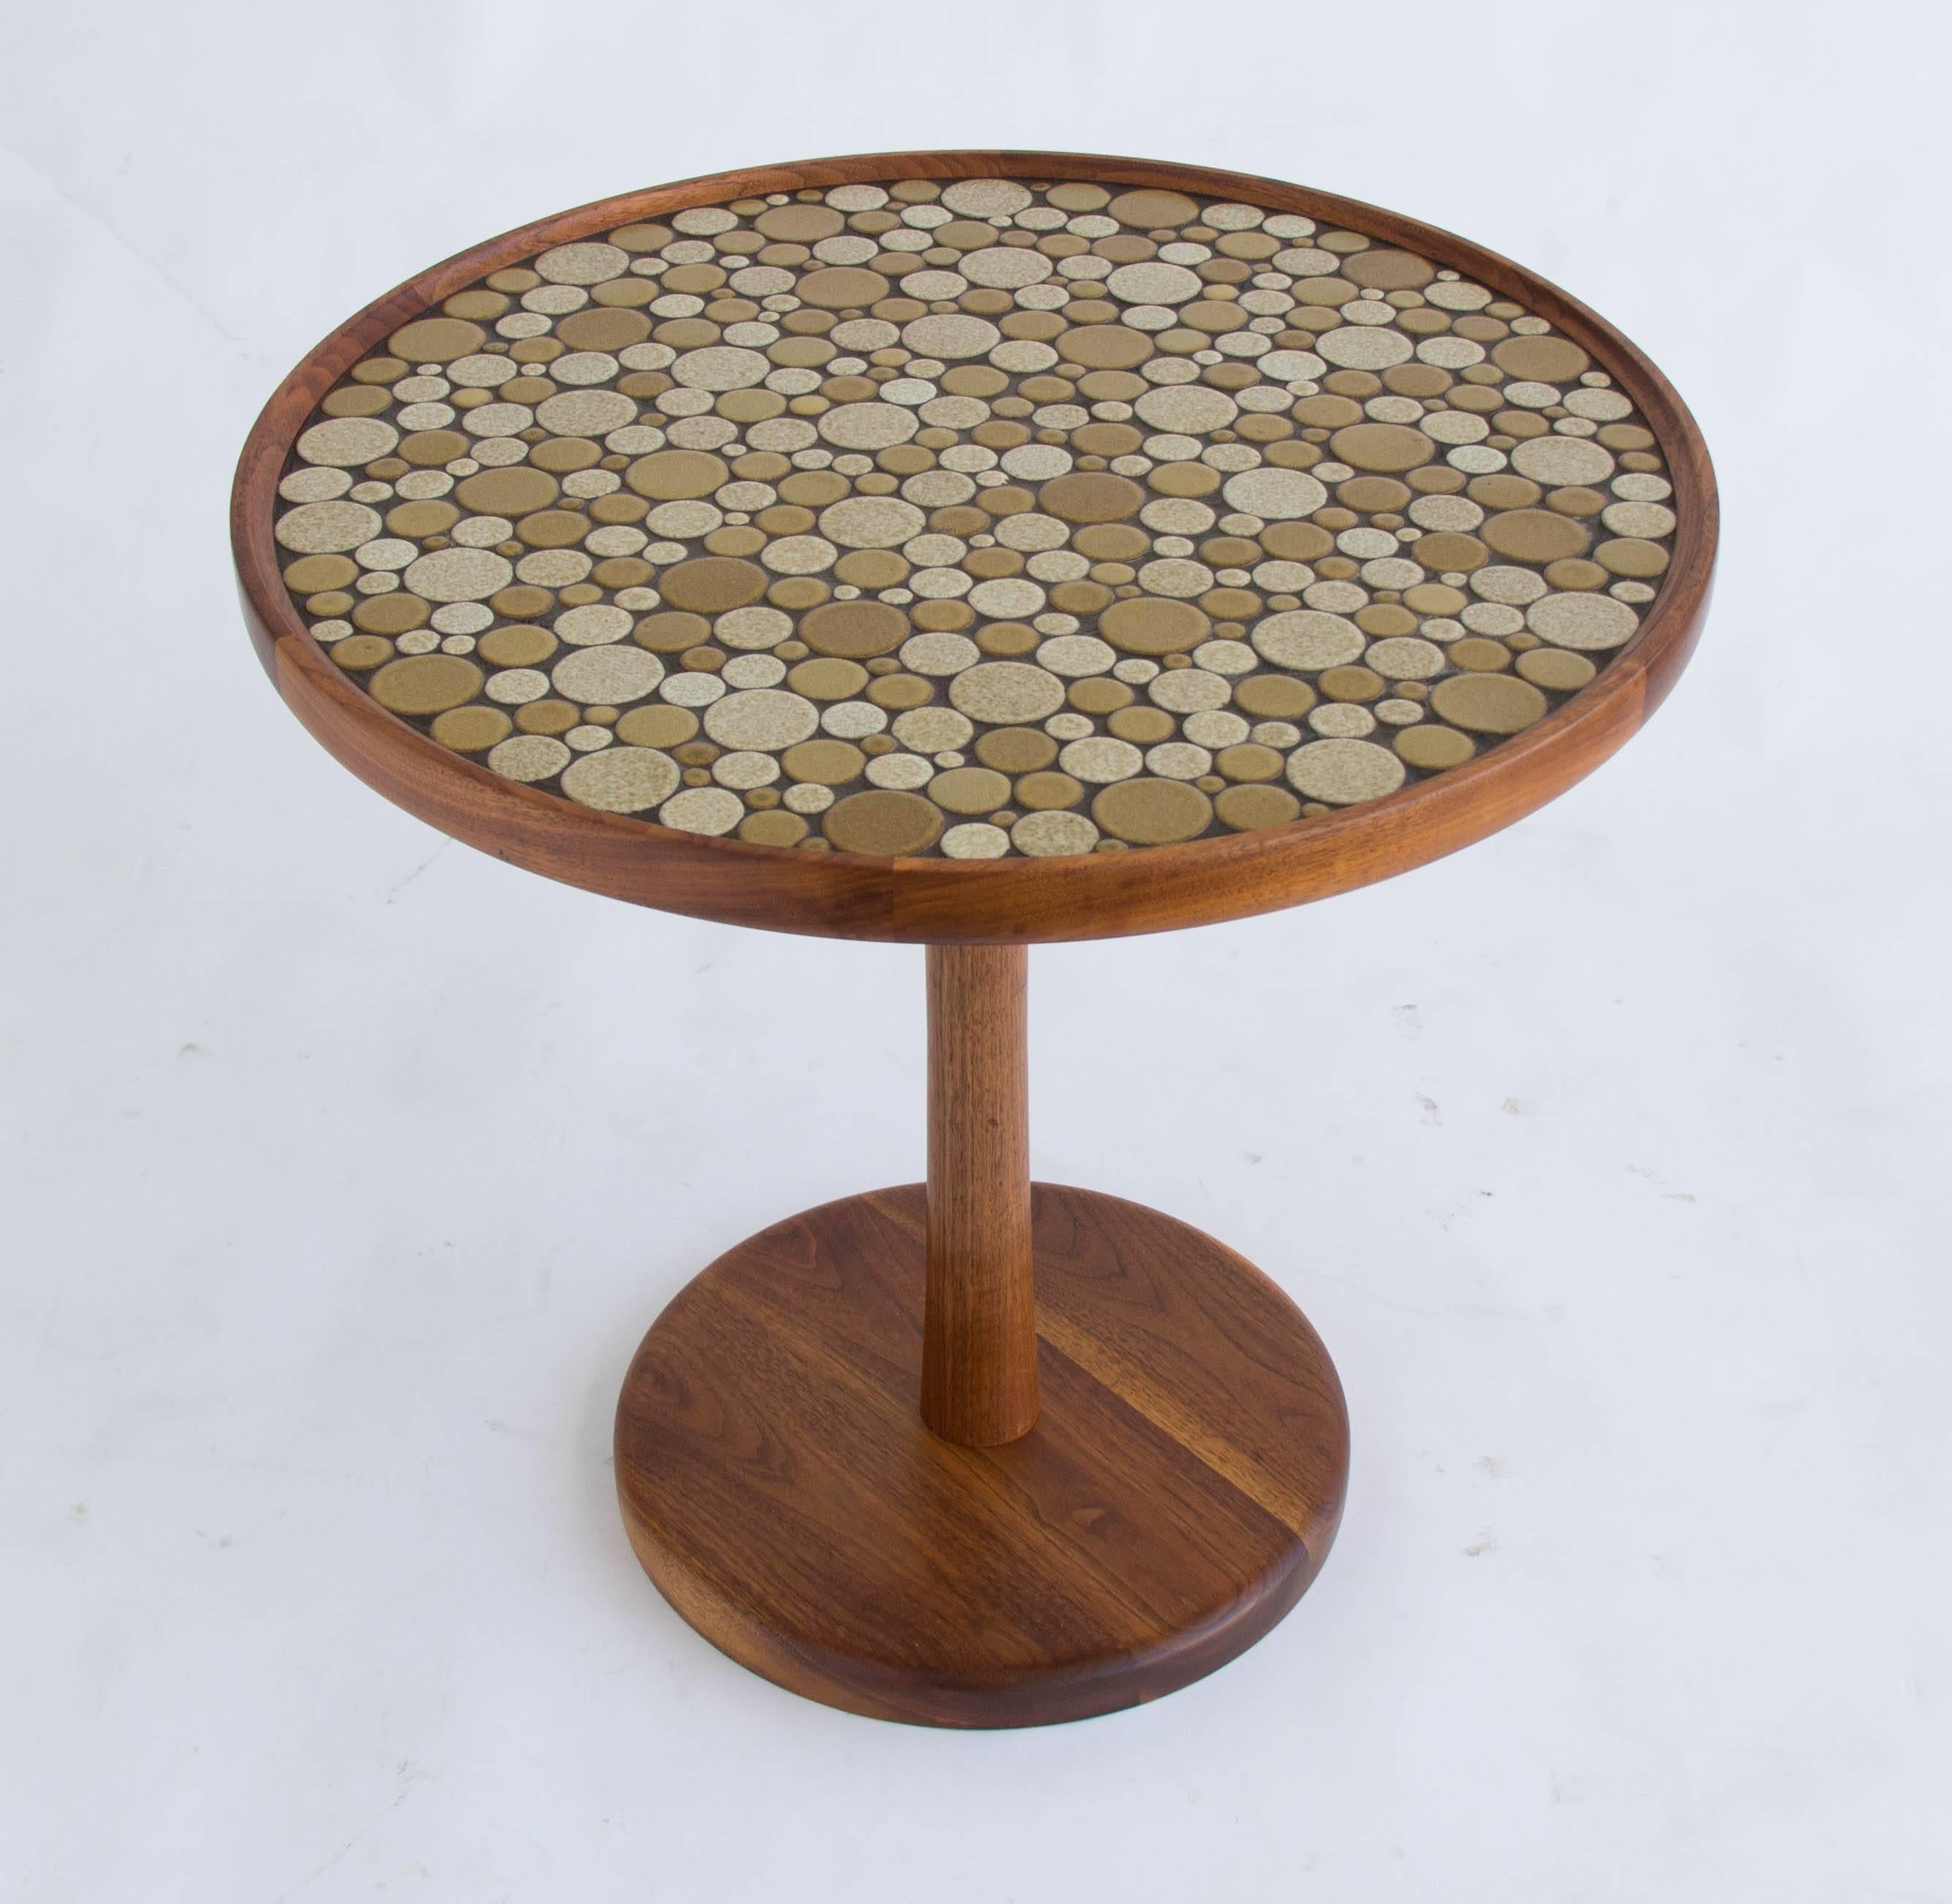 Round side table by Gordon & Jane Martz. The table top is inlaid with ceramic coin tiles in a neutral color palette. The frame, base and pedestal of the table are solid walnut. 

Condition: The table has been professionally cleaned and oiled and